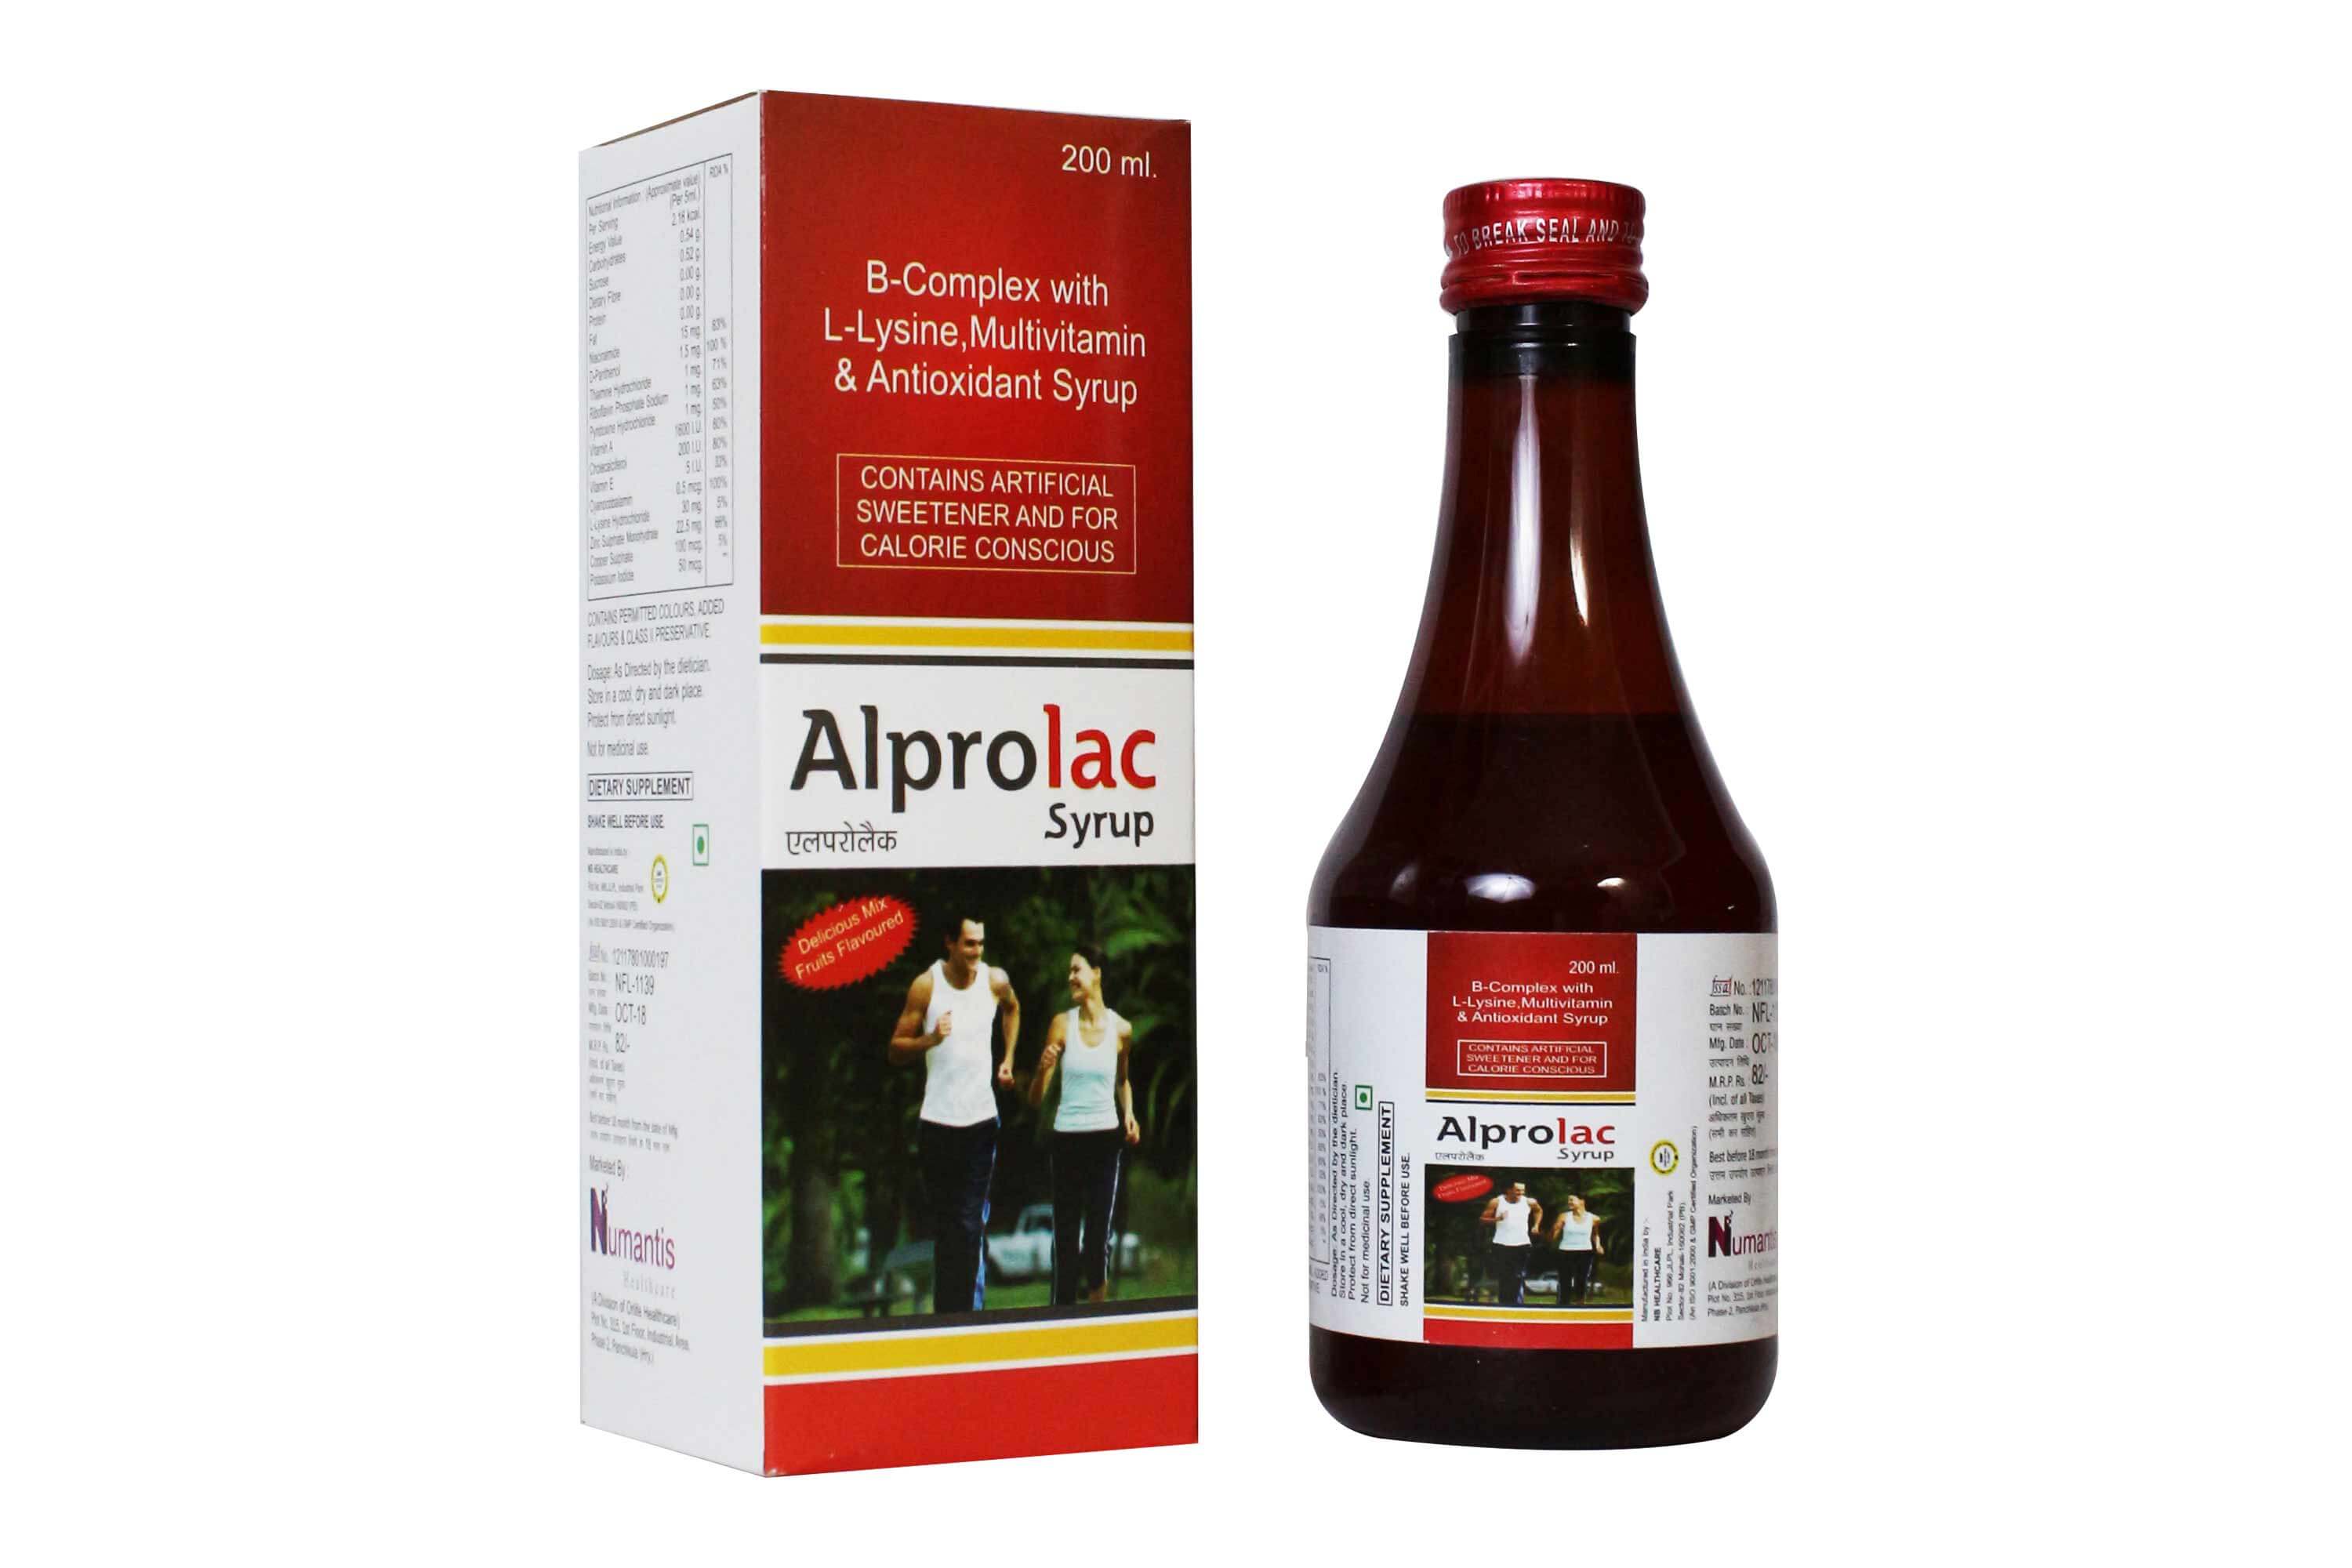 Product Name: Alprolac, Compositions of Alprolac are B-Complex with L-Lysine, Multivitamin & Antioxidant Syrup - Numantis Healthcare